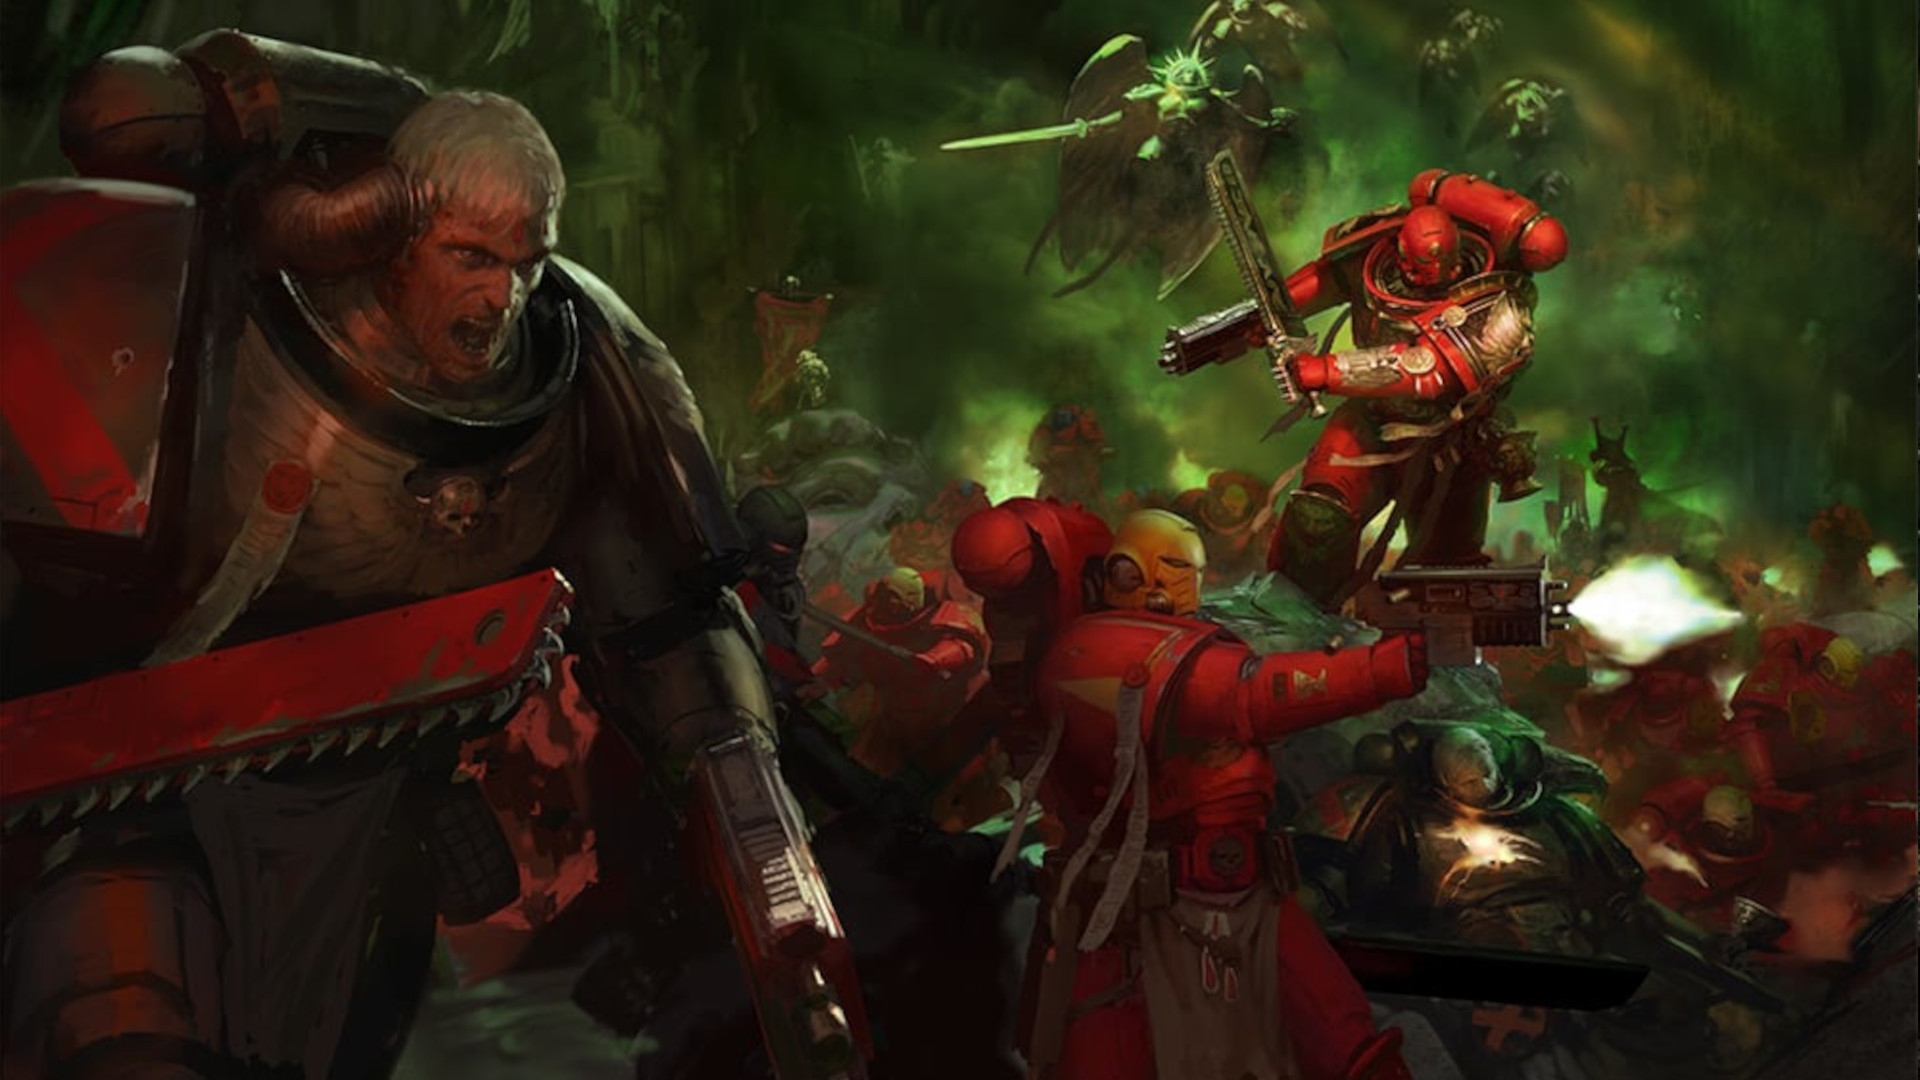 The Blood Angels will star in an official Warhammer 40,000 animated series  next year